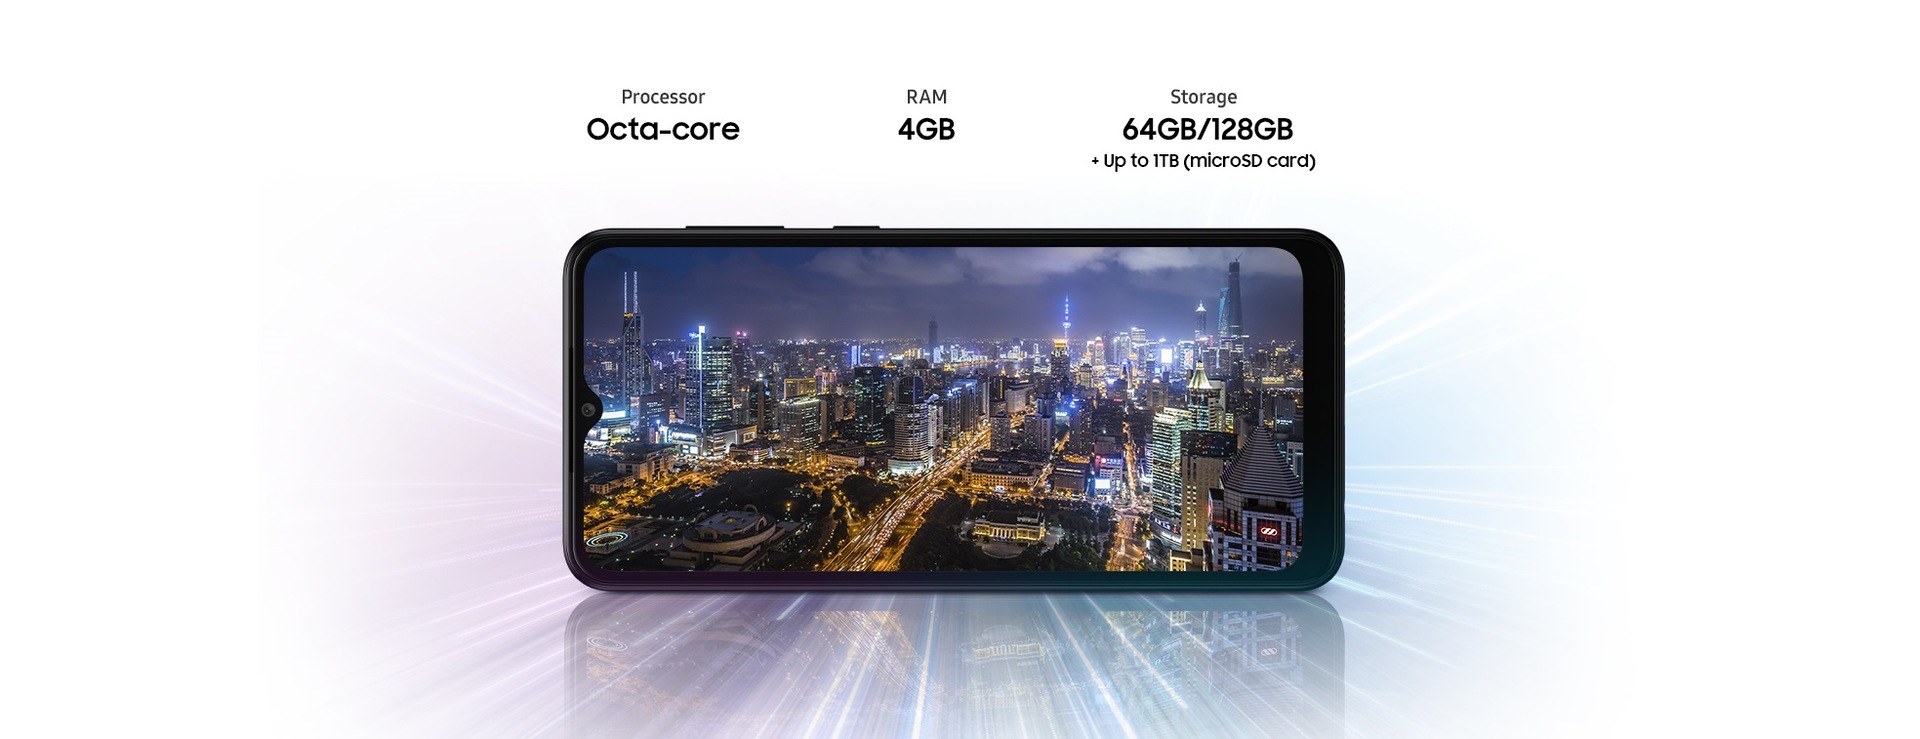 Galaxy A04s shows night city view, indicating device offers Octa-core processor, 3GB/4GB RAM, 32GB/64GB/128GB with up to 1TB-storage.